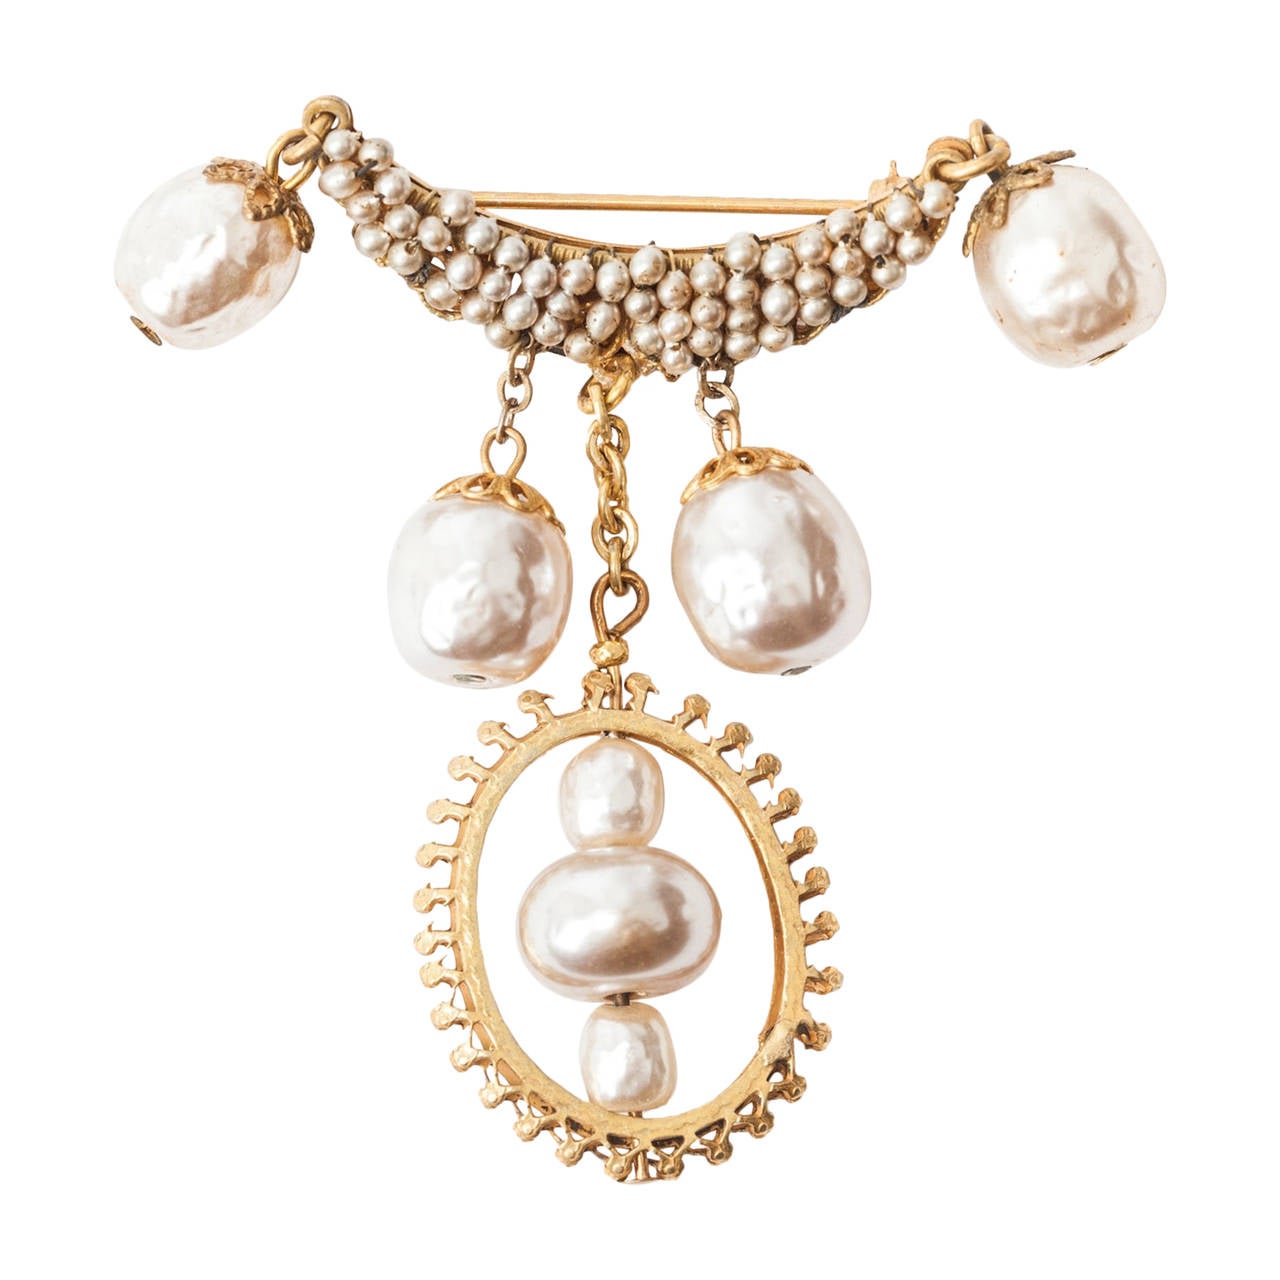 Miriam Haskell Pearl Drop Cresent Brooch For Sale at 1stdibs